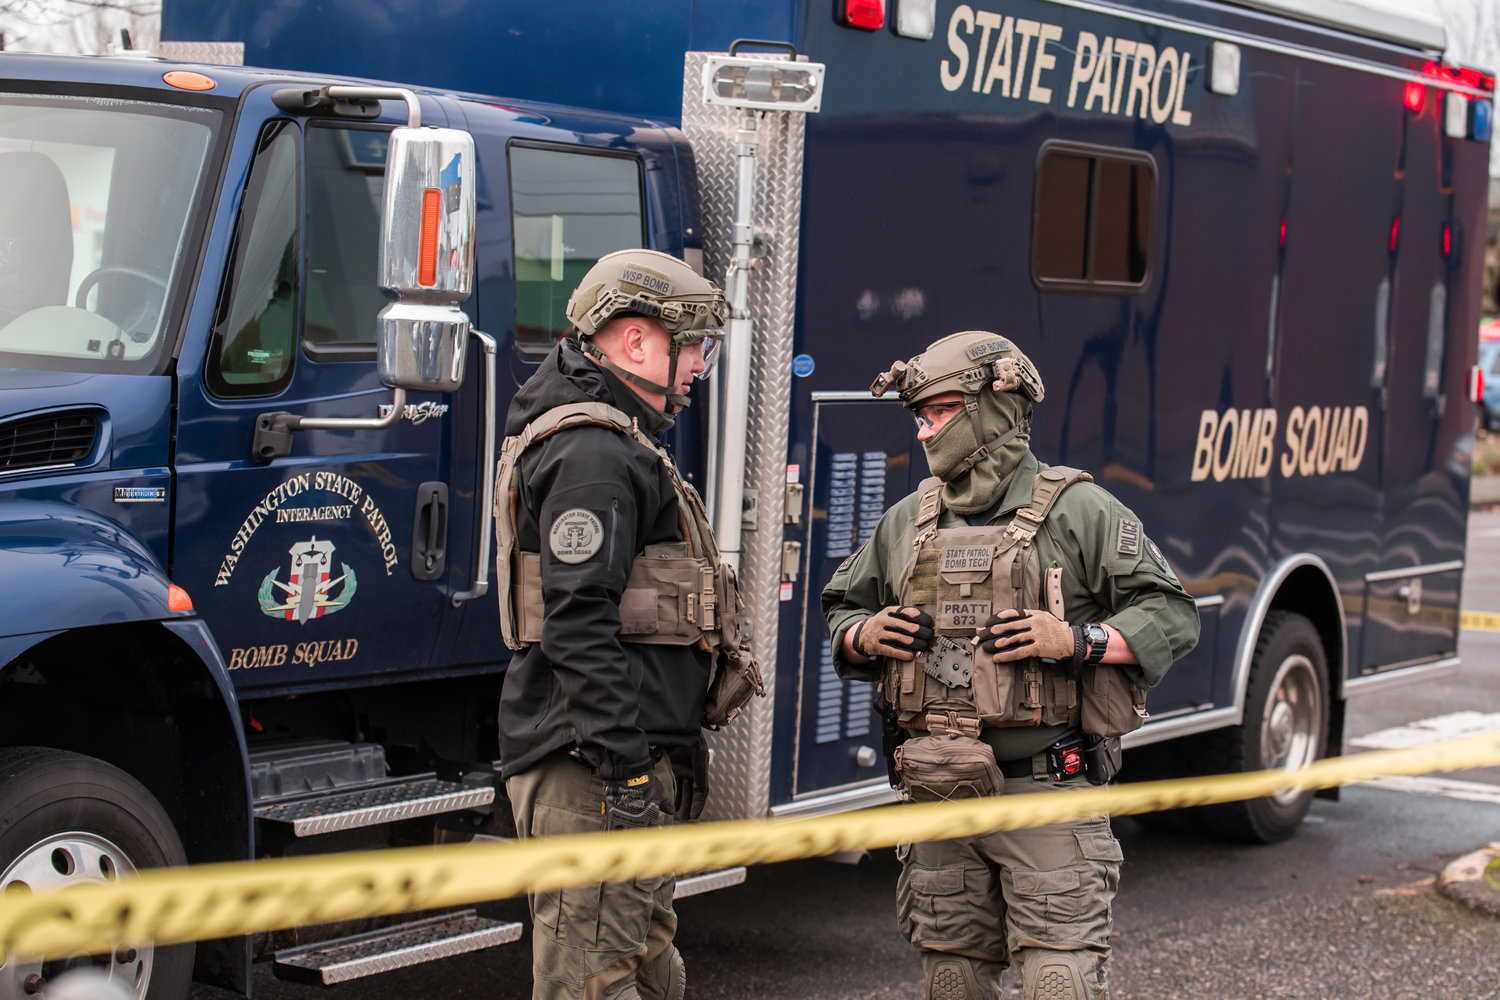 State Patrol Bomb Techs suit up while responding to a scene at the 1st Security Bank location at 604 South Tower Avenue in Centralia after reports of an explosion in the area last month.